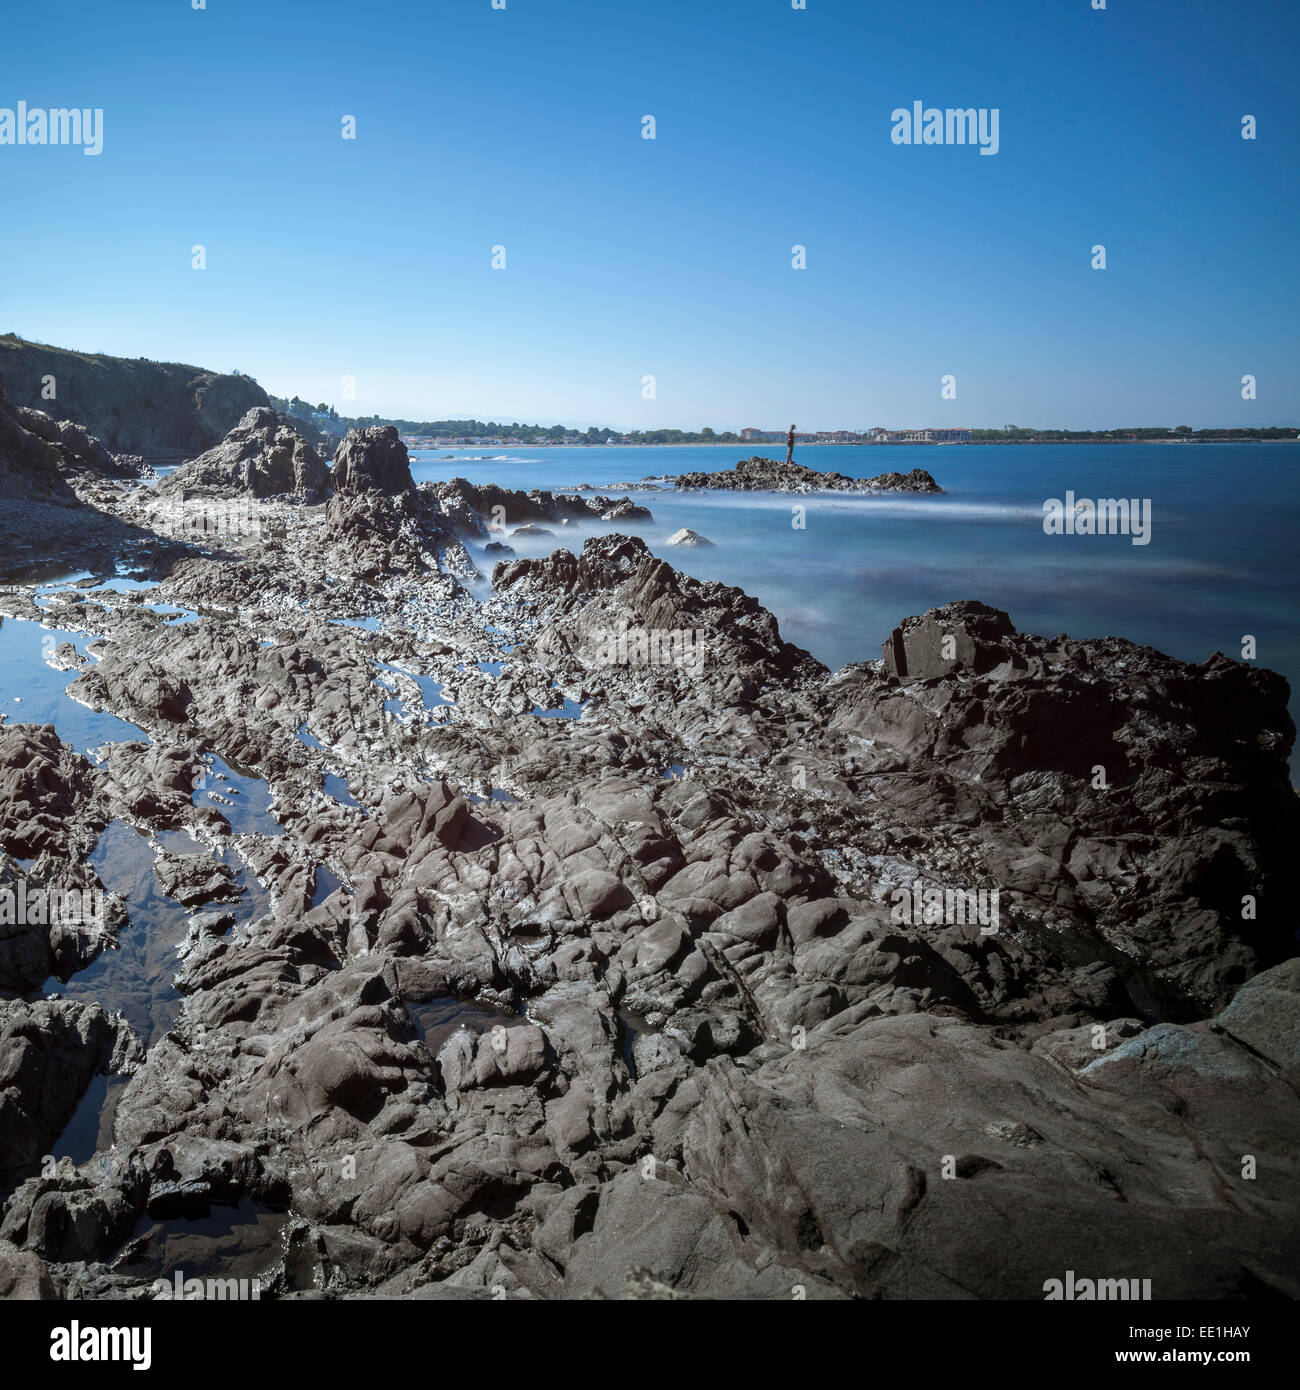 Rocky beach at low tide with man fishing on rock, Argelles, France, Europe Stock Photo